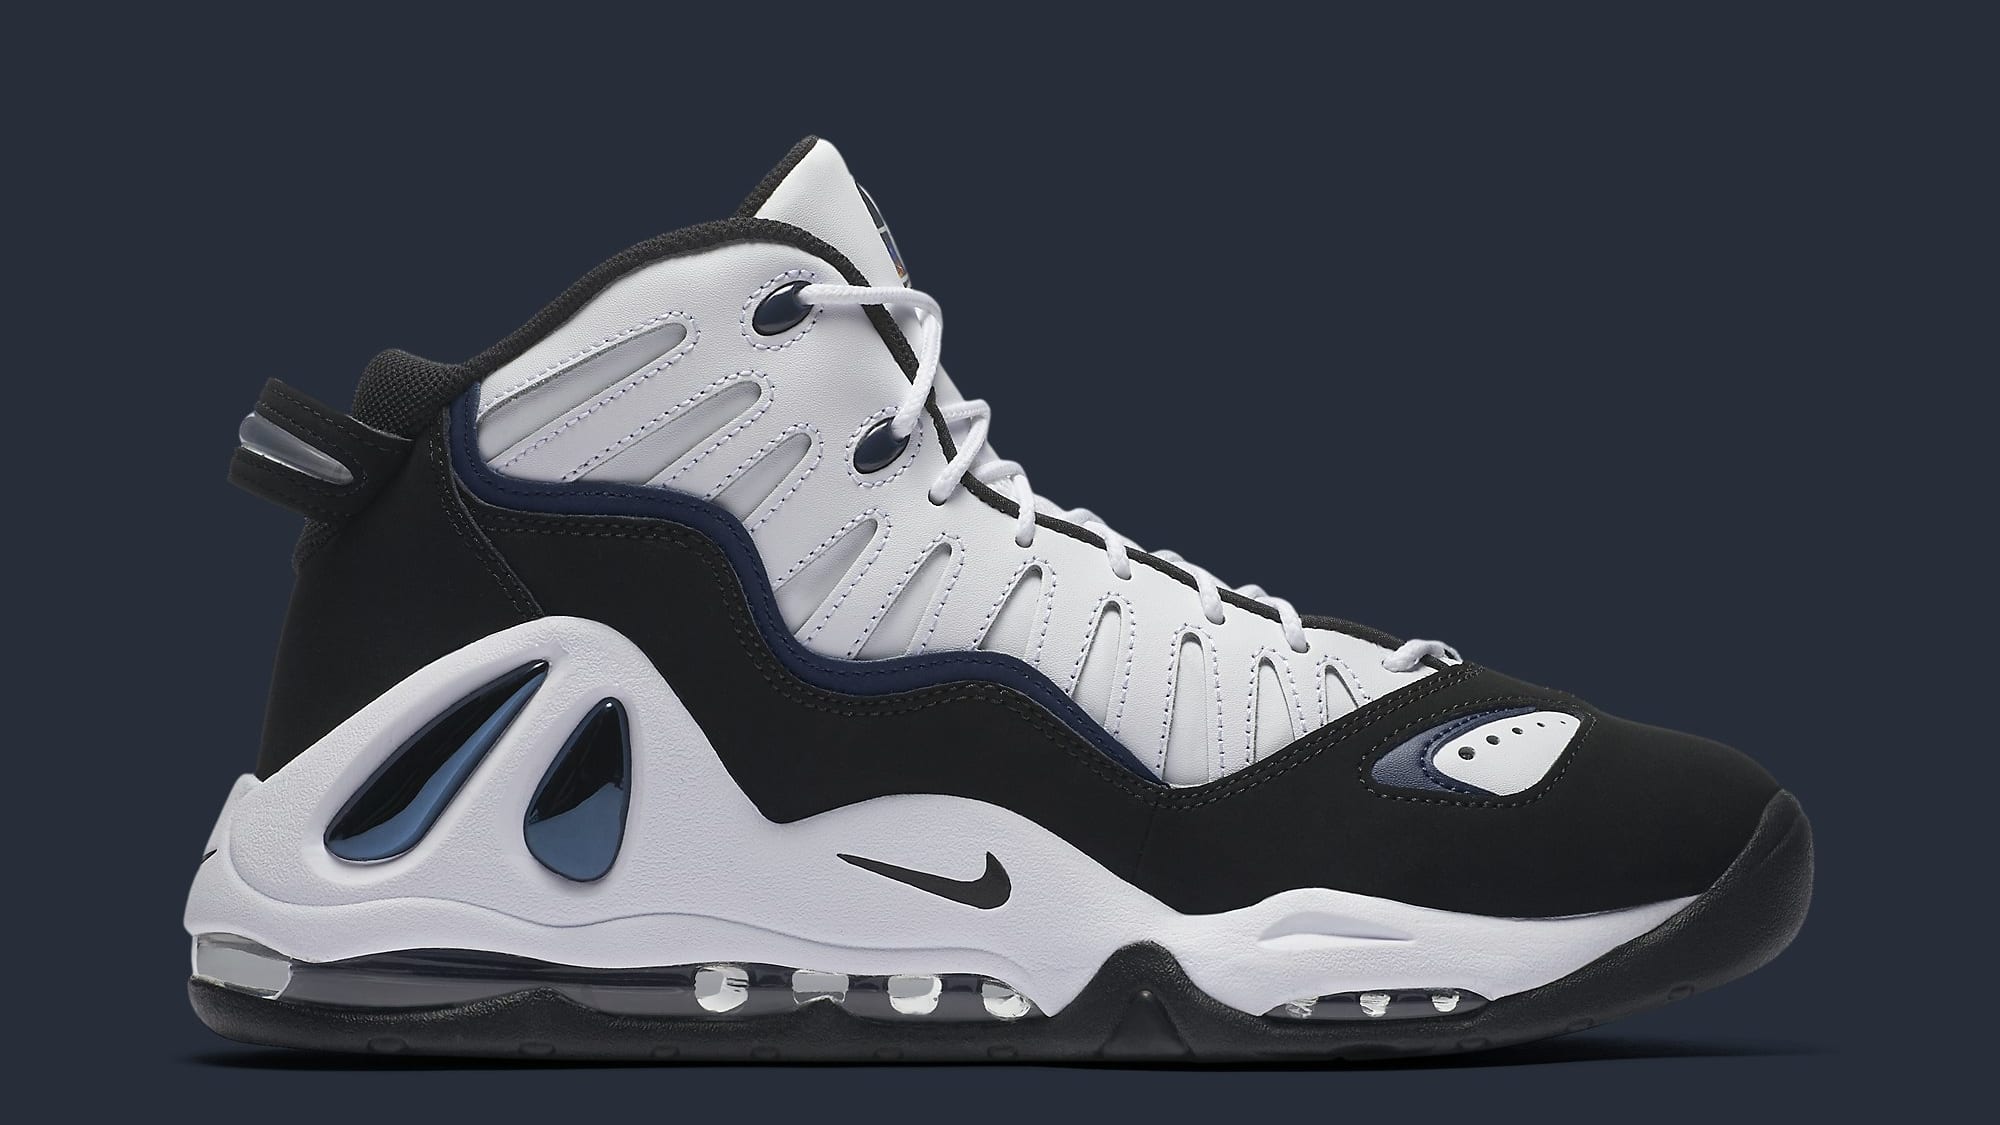 nike-air-max-uptempo-97-college-navy-399207-101-release-date-medial